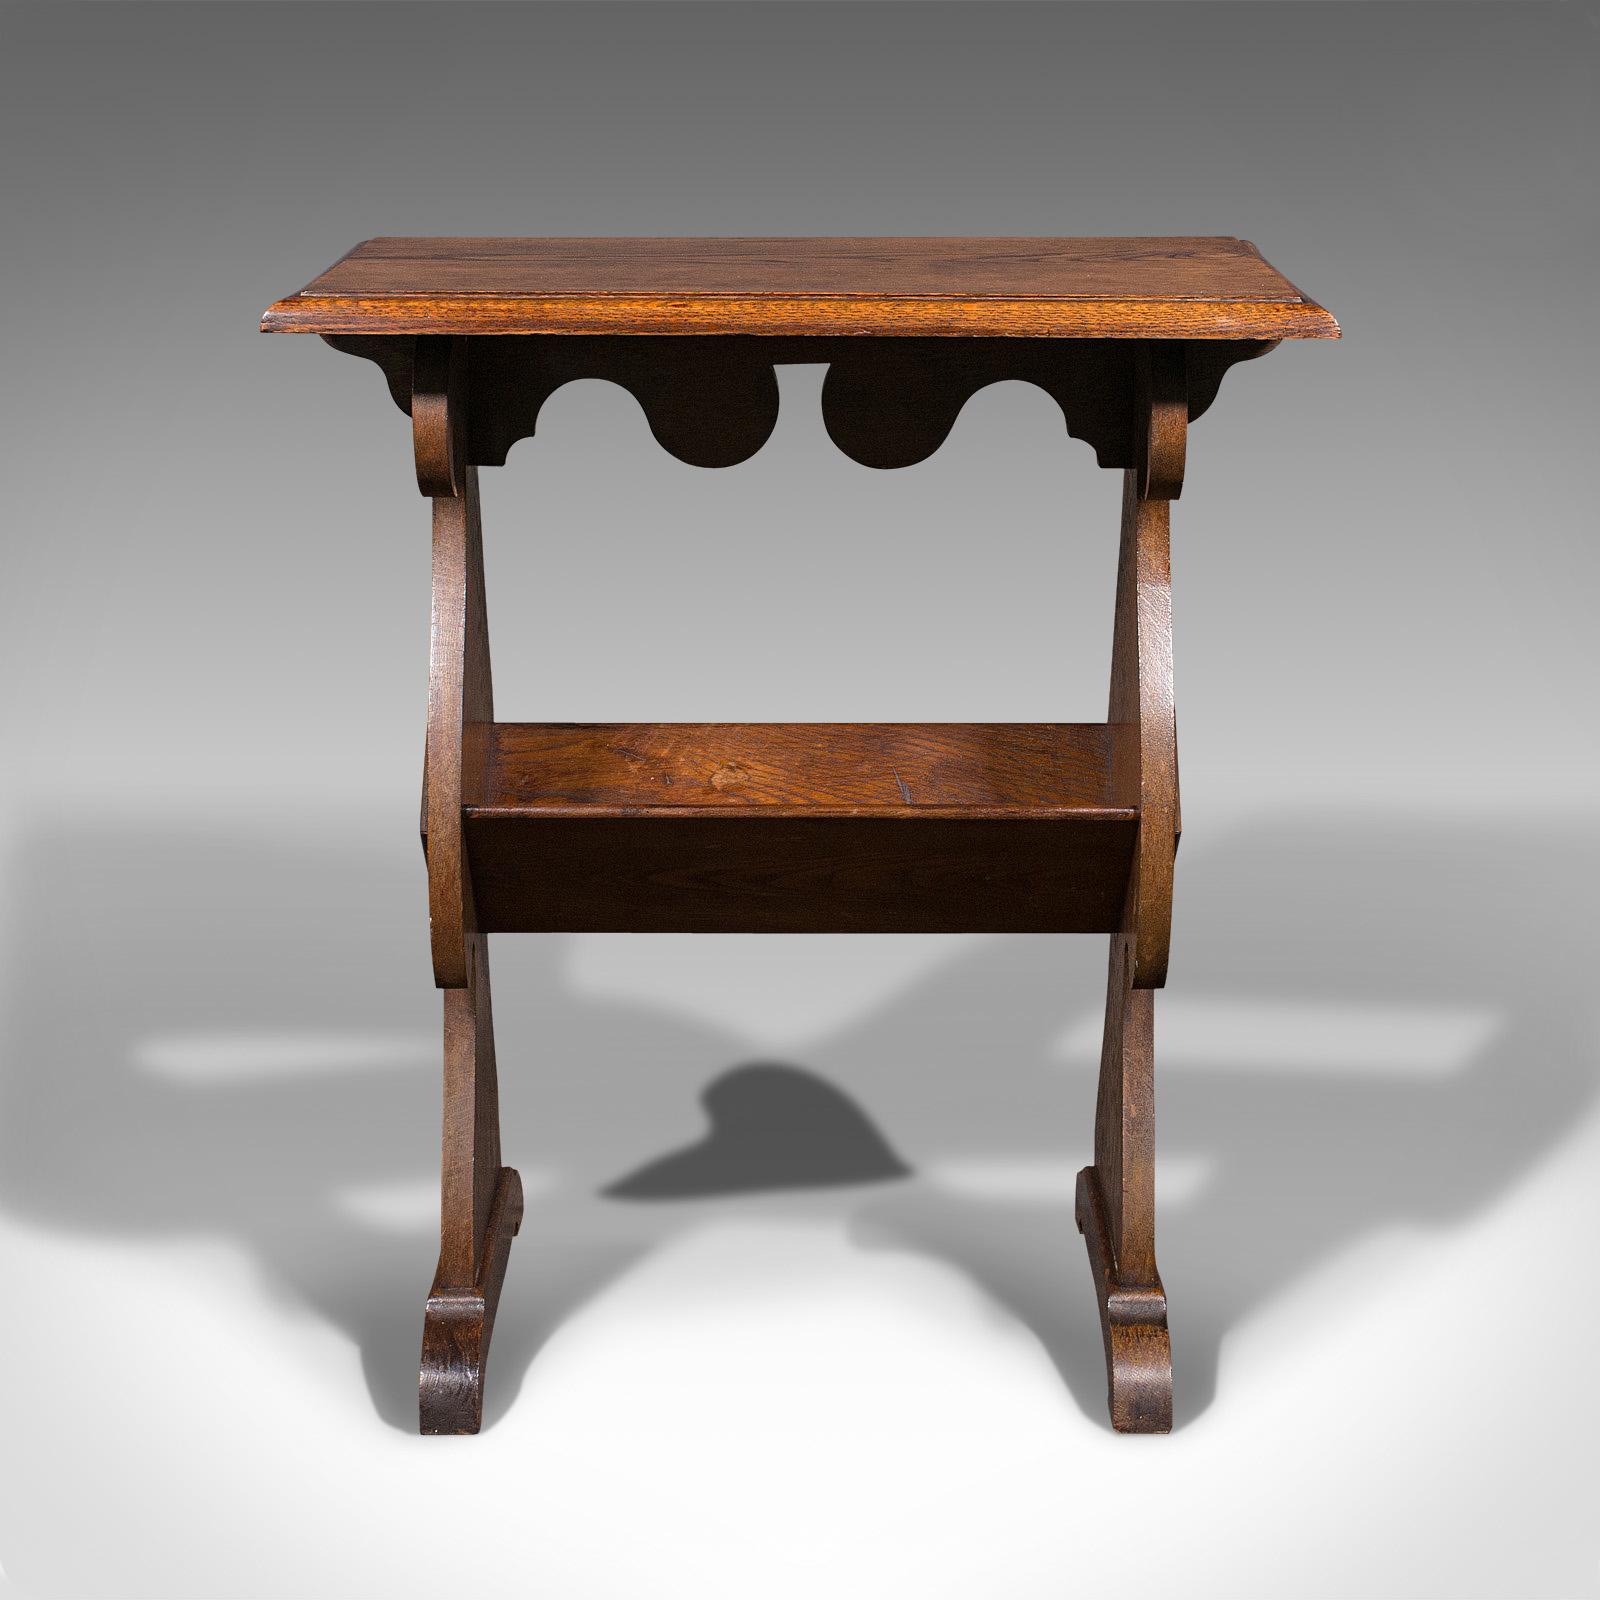 British Antique Reader's Stand, English, Oak, Side Table, Book Trough, Edwardian, C.1910 For Sale